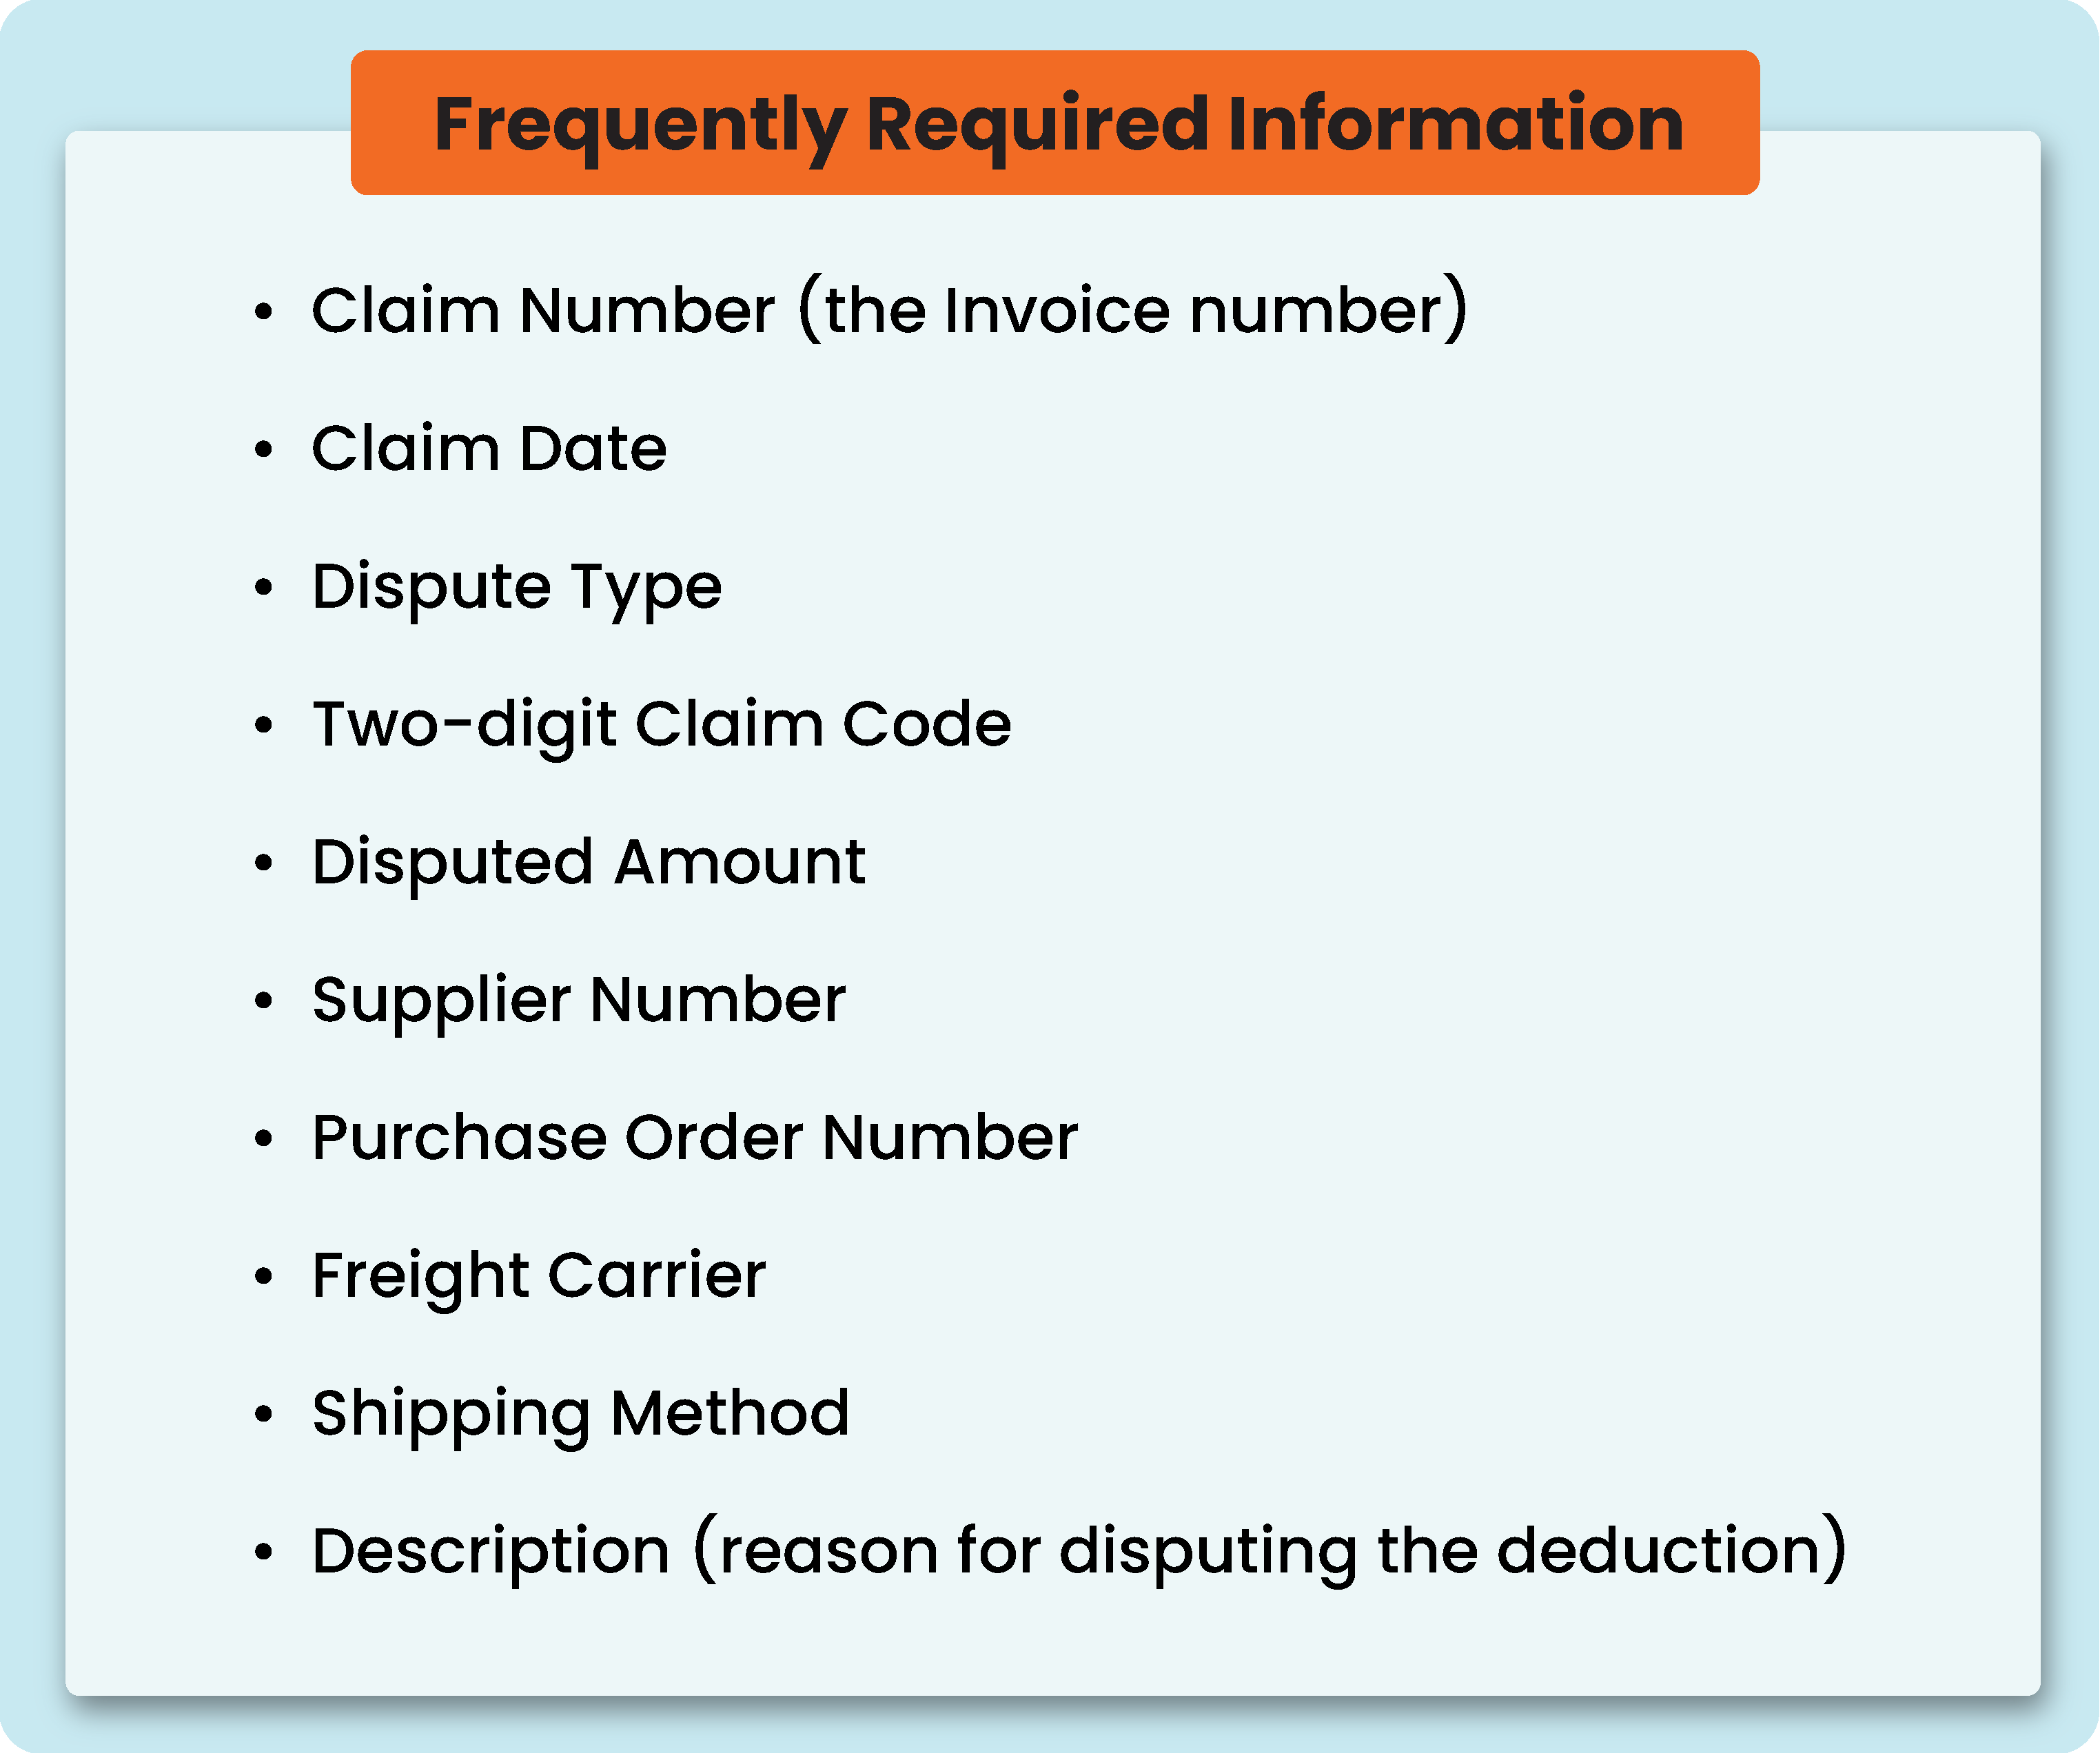 Frequently Required Information